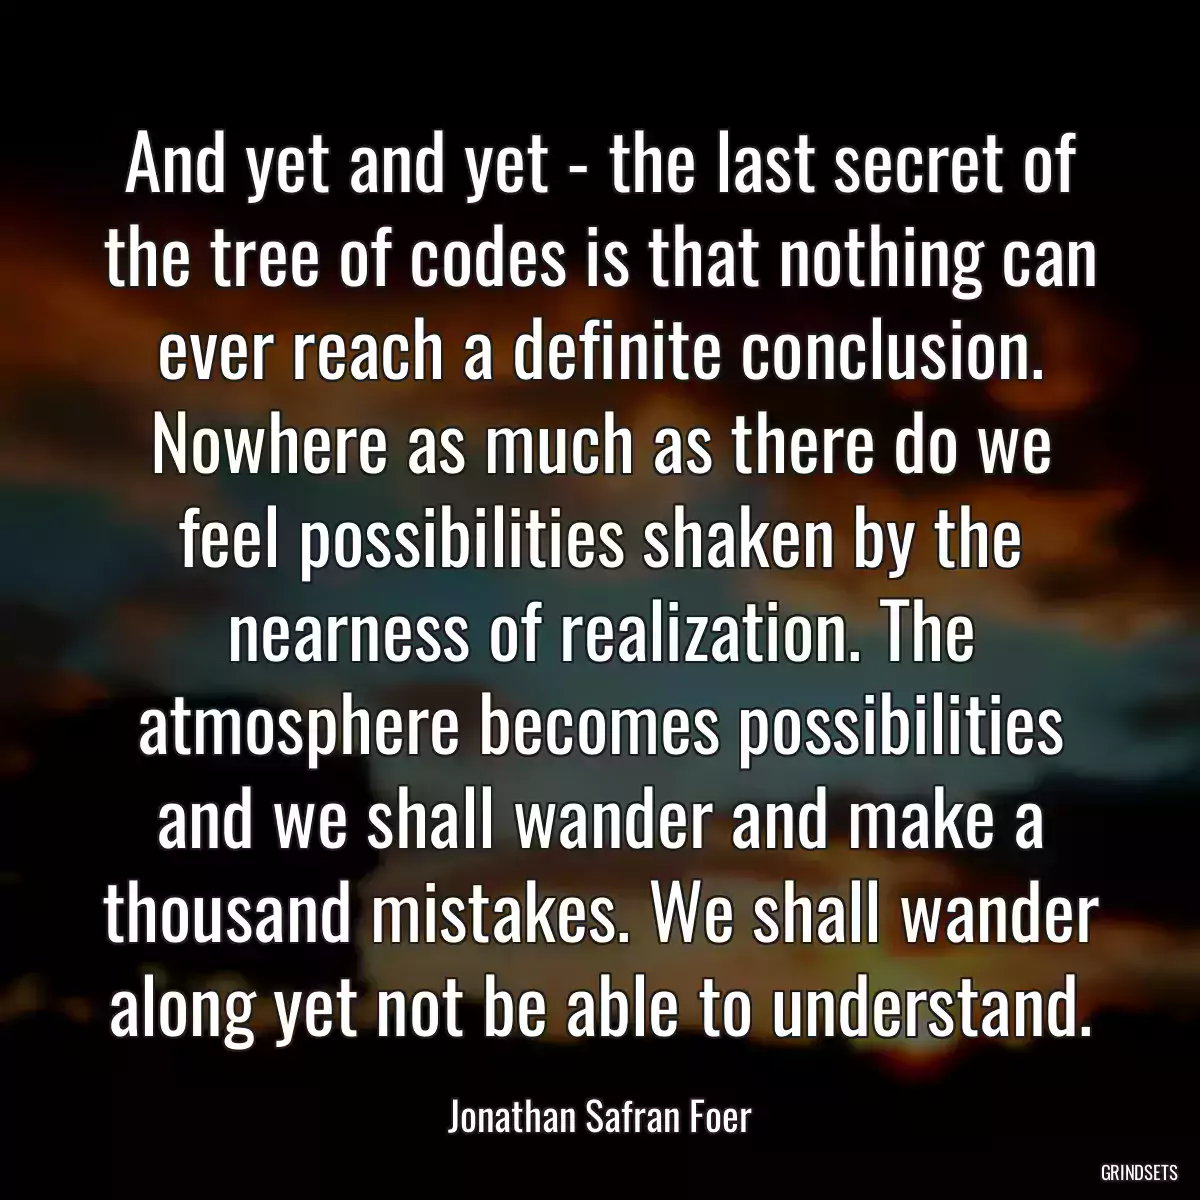 And yet and yet - the last secret of the tree of codes is that nothing can ever reach a definite conclusion. Nowhere as much as there do we feel possibilities shaken by the nearness of realization. The atmosphere becomes possibilities and we shall wander and make a thousand mistakes. We shall wander along yet not be able to understand.